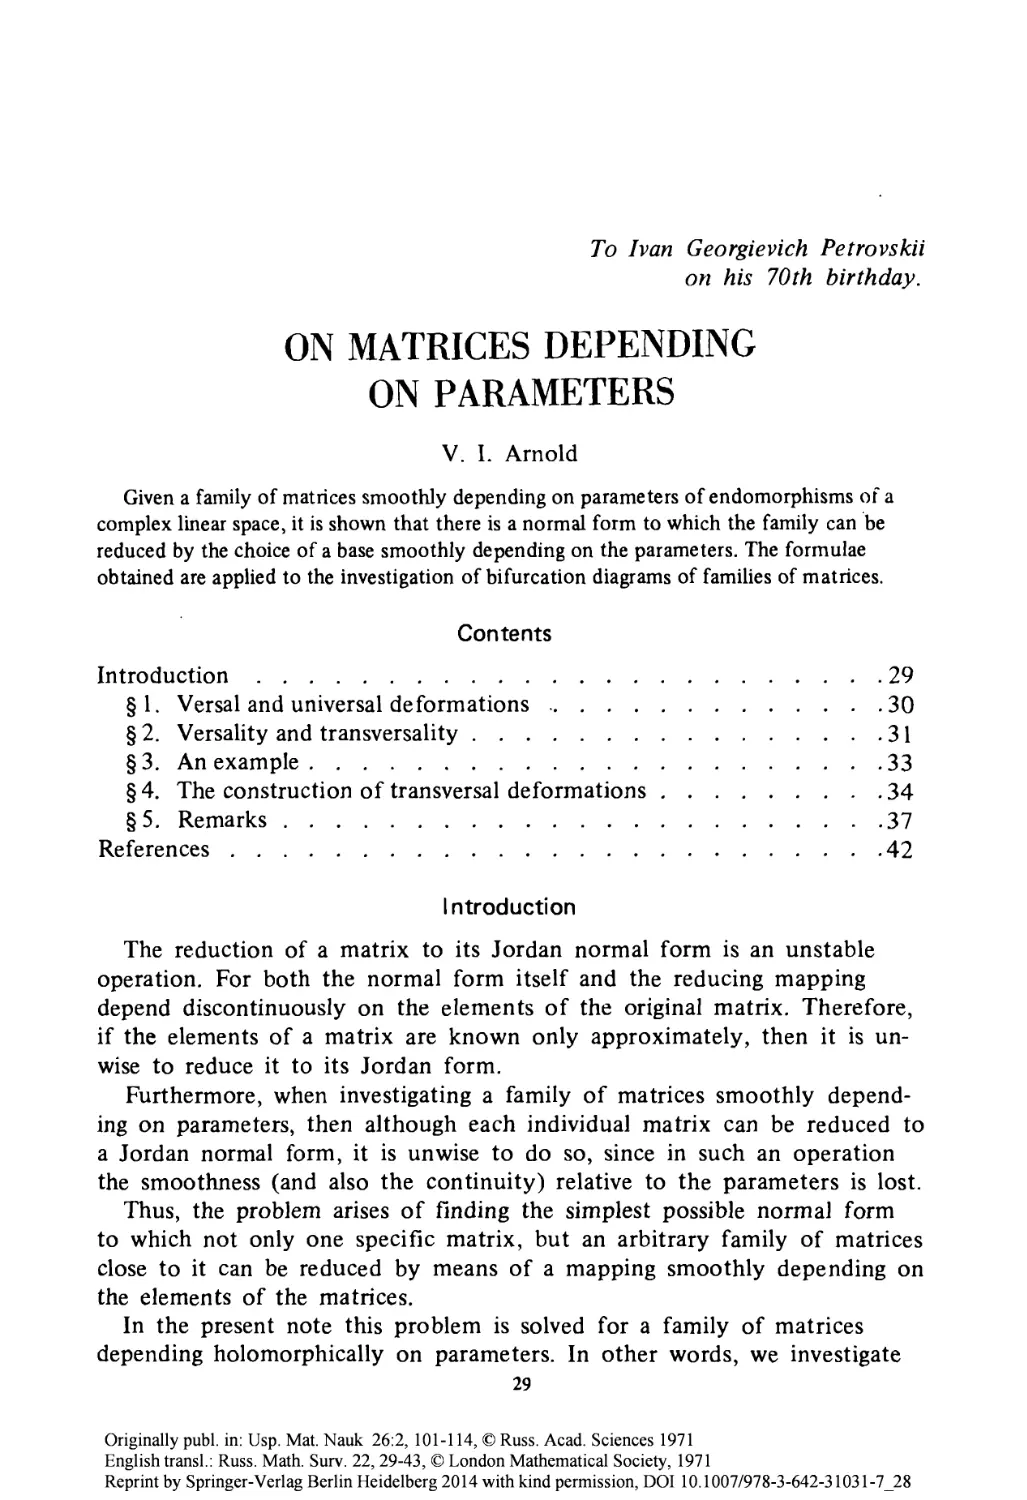 28 On matrices depending on parameters